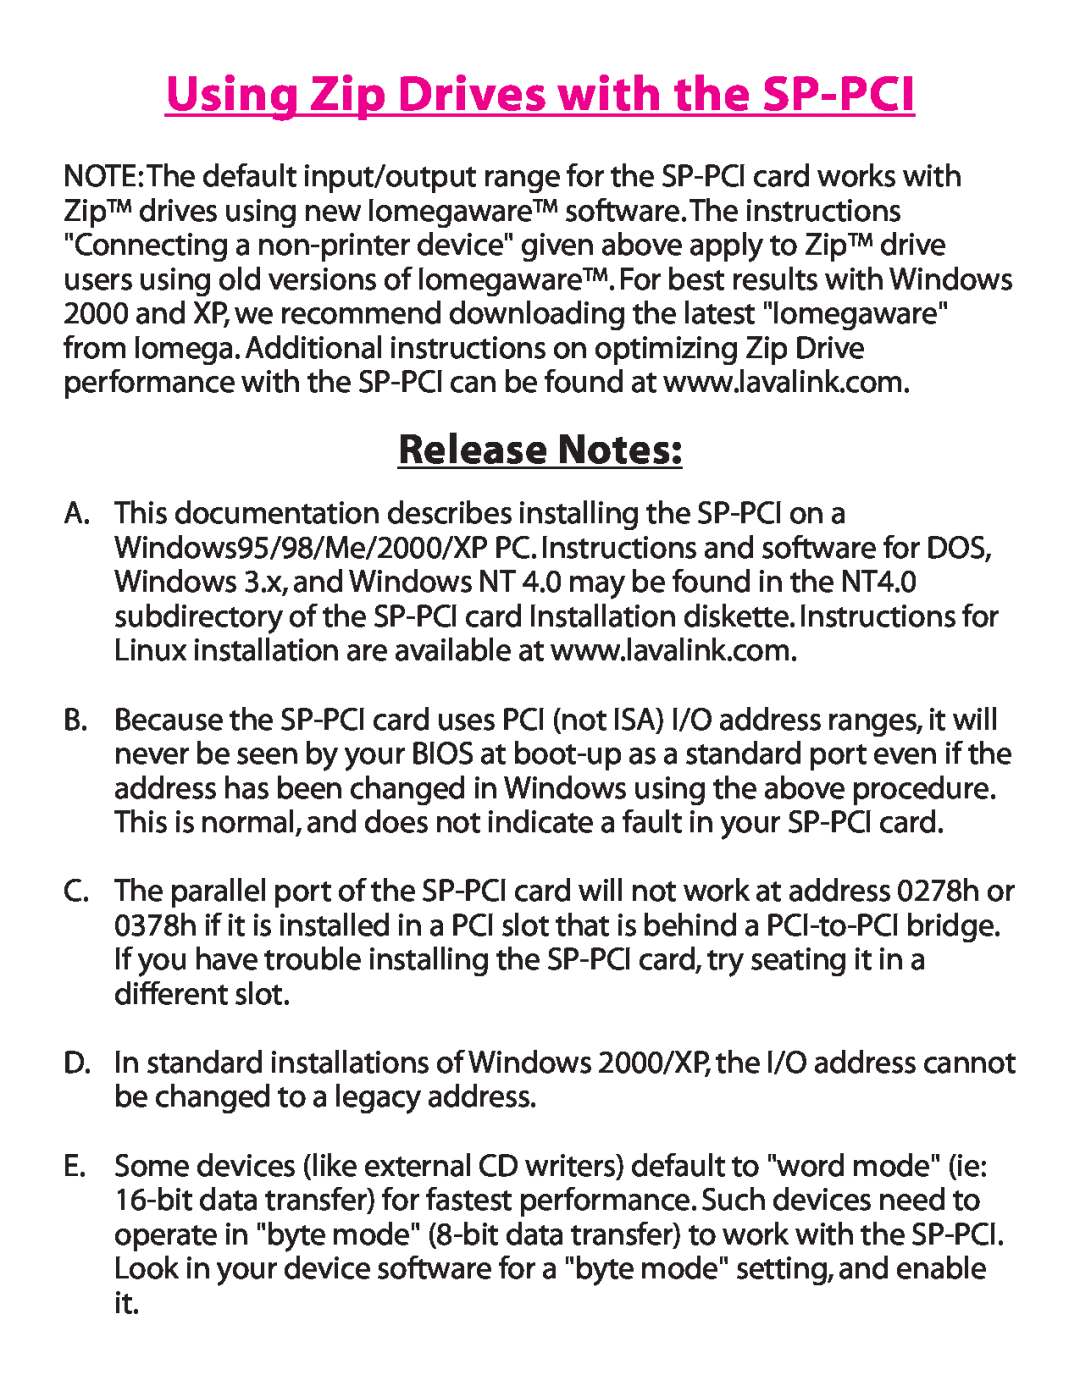 Lava Computer installation manual Using Zip Drives with the SP-PCI, Release Notes 